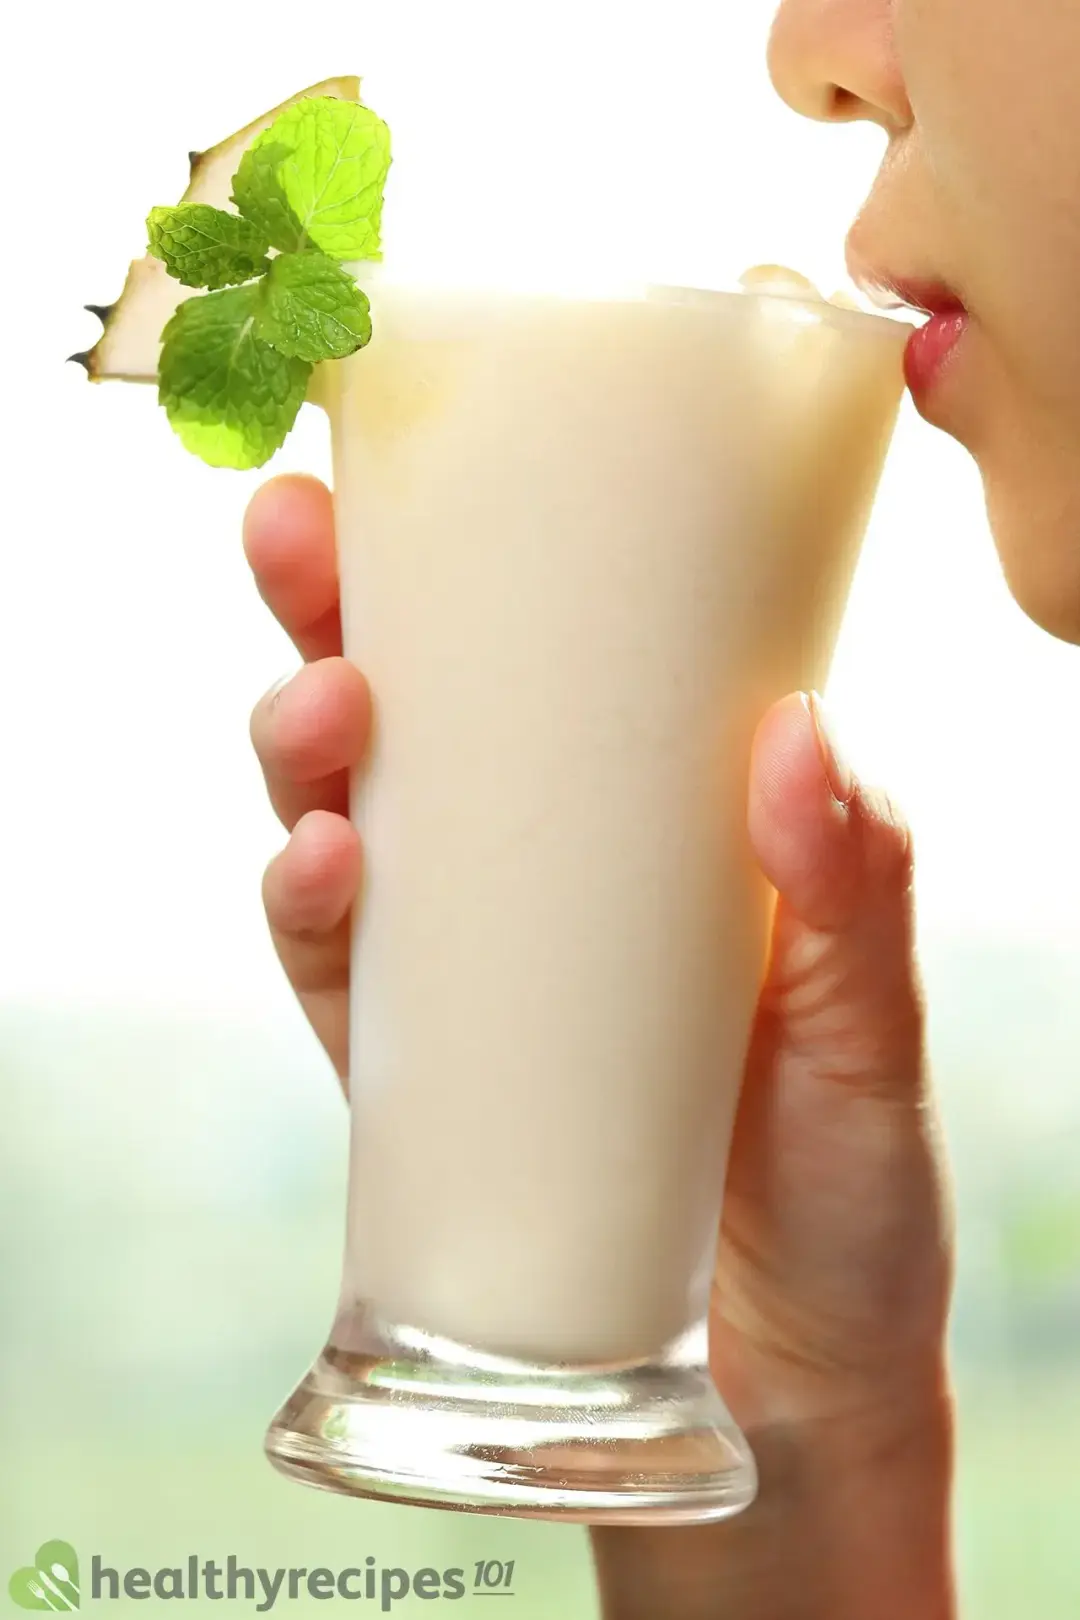 A person holding a tall glass of soursop juice close to their mouth